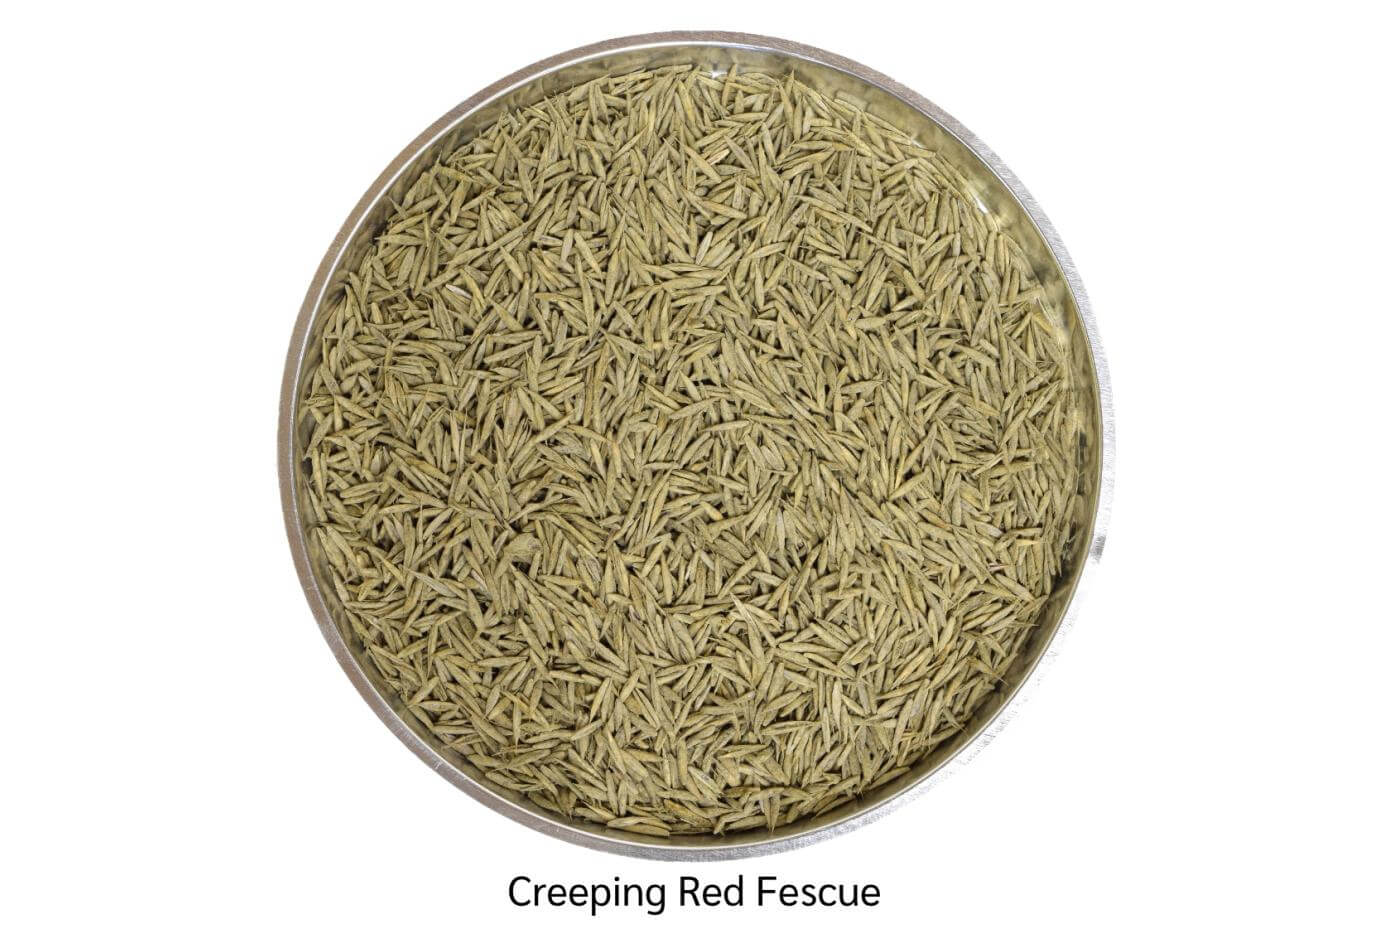 Creeping red fescue grass seed